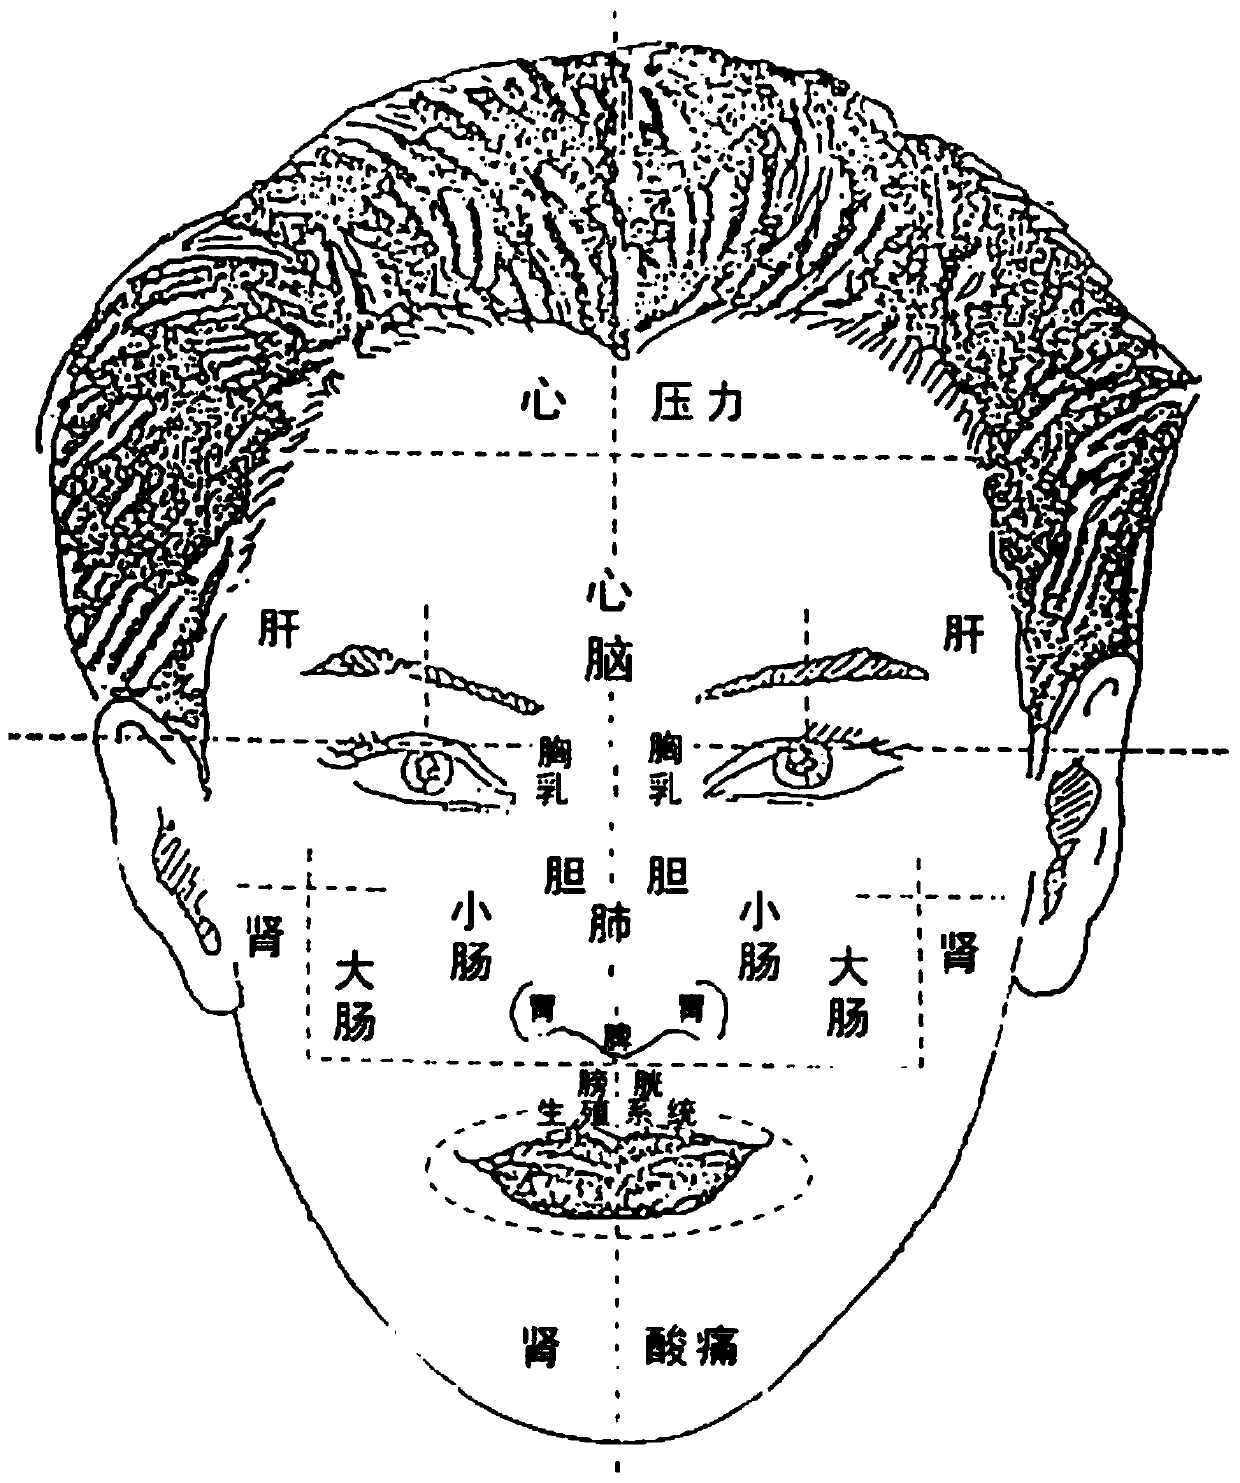 Health state diagnosis system based on facial image